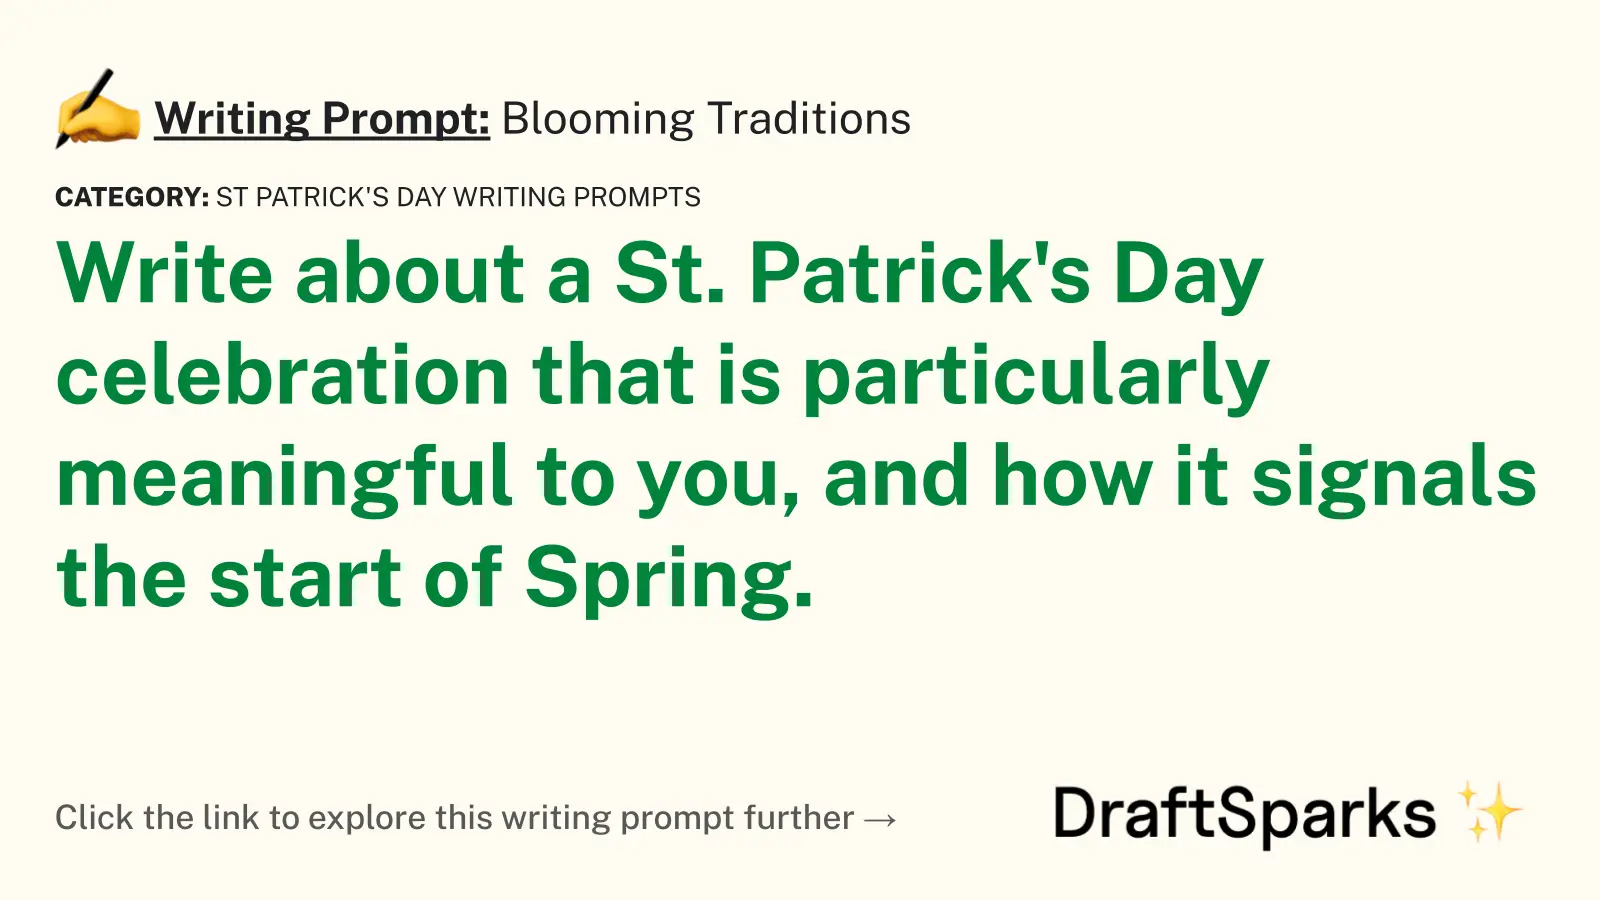 Blooming Traditions